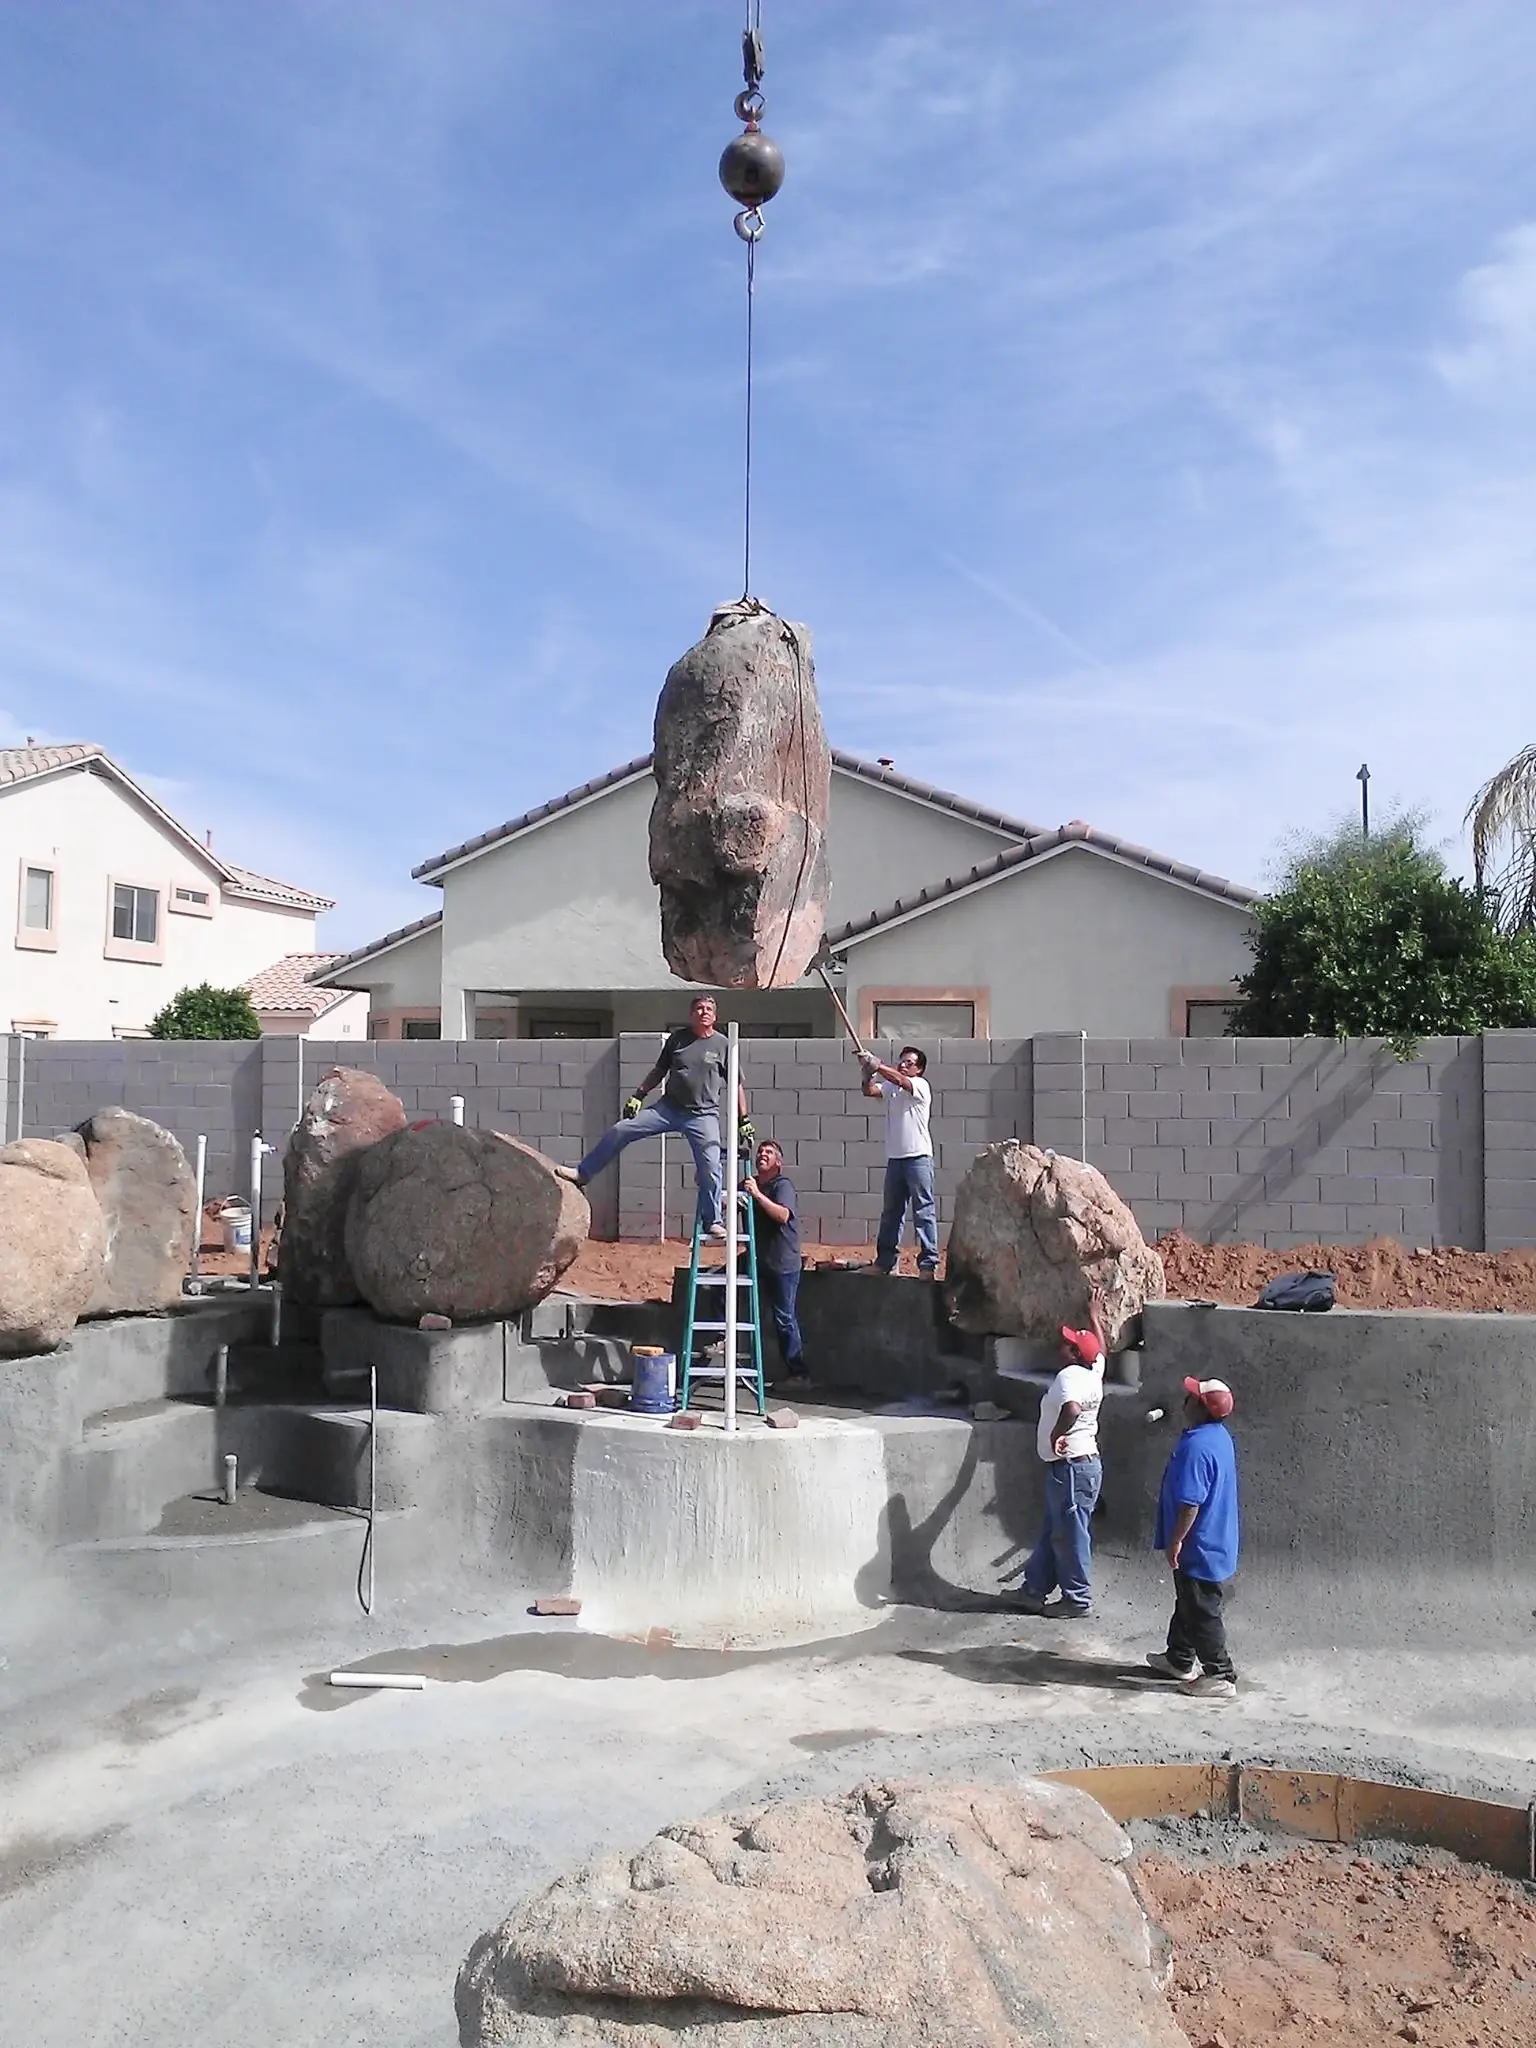 A crane delicately lowers a large boulder into place while a crew constructs a water feature in a new pool build, illustrating the precision and creativity in pool and spa projects.